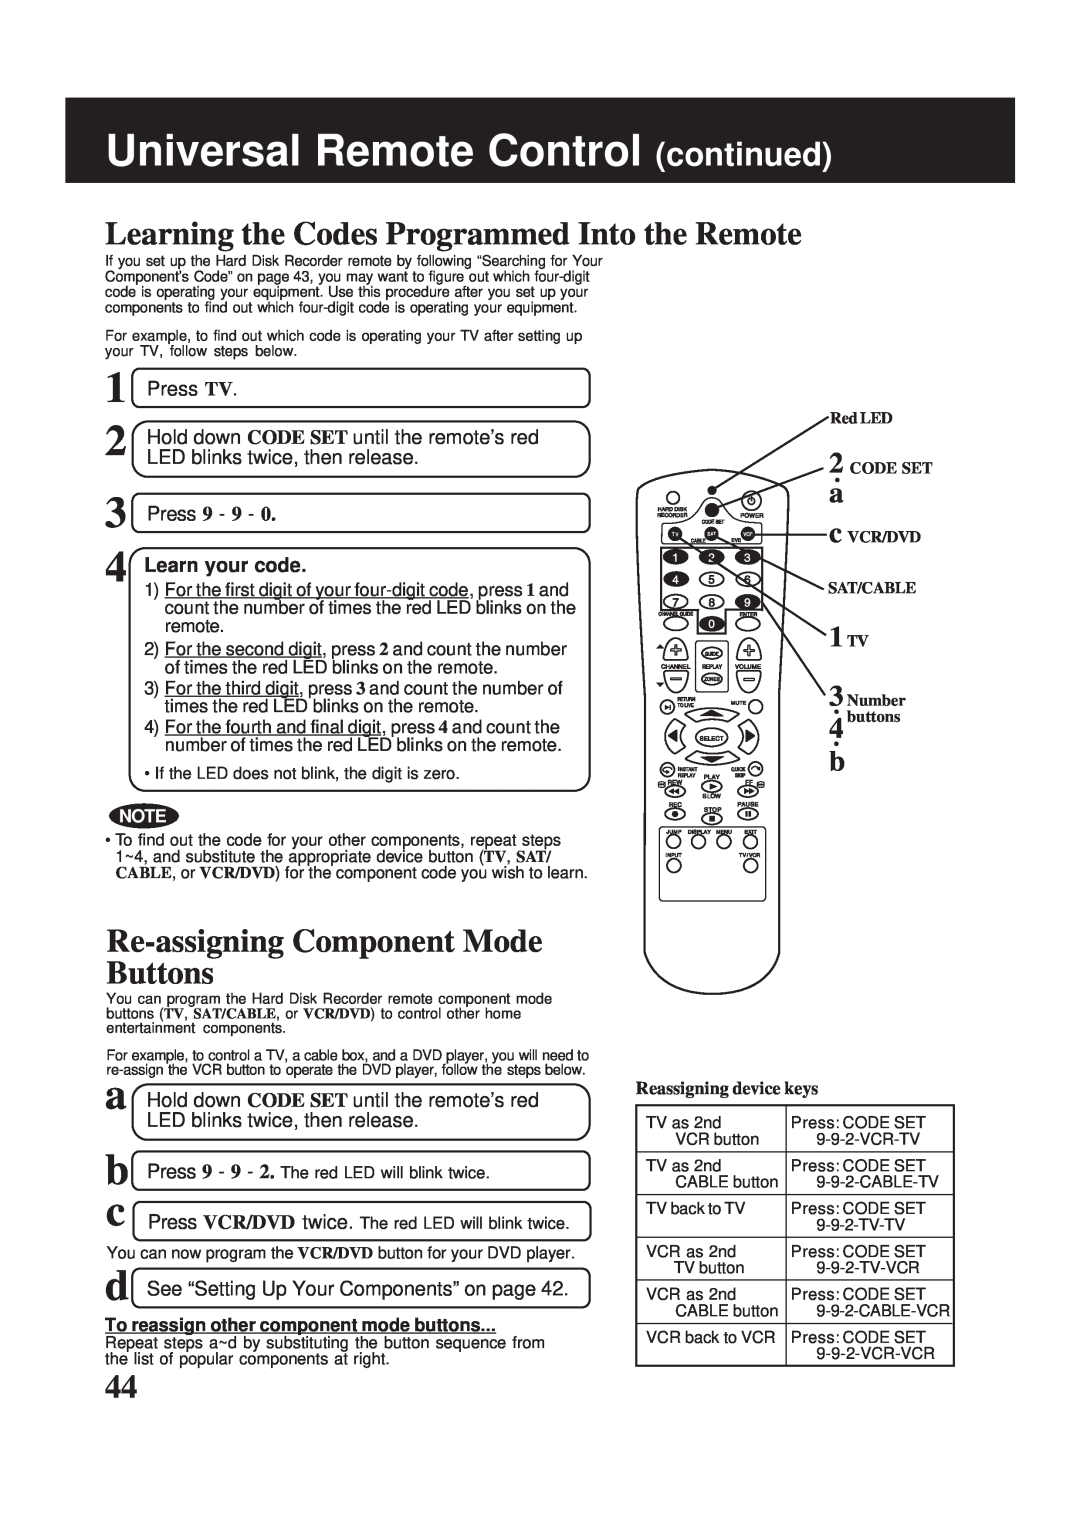 Panasonic PV-HS2000 Universal Remote Control continued, Learning the Codes Programmed Into the Remote, 1 TV, Press TV 